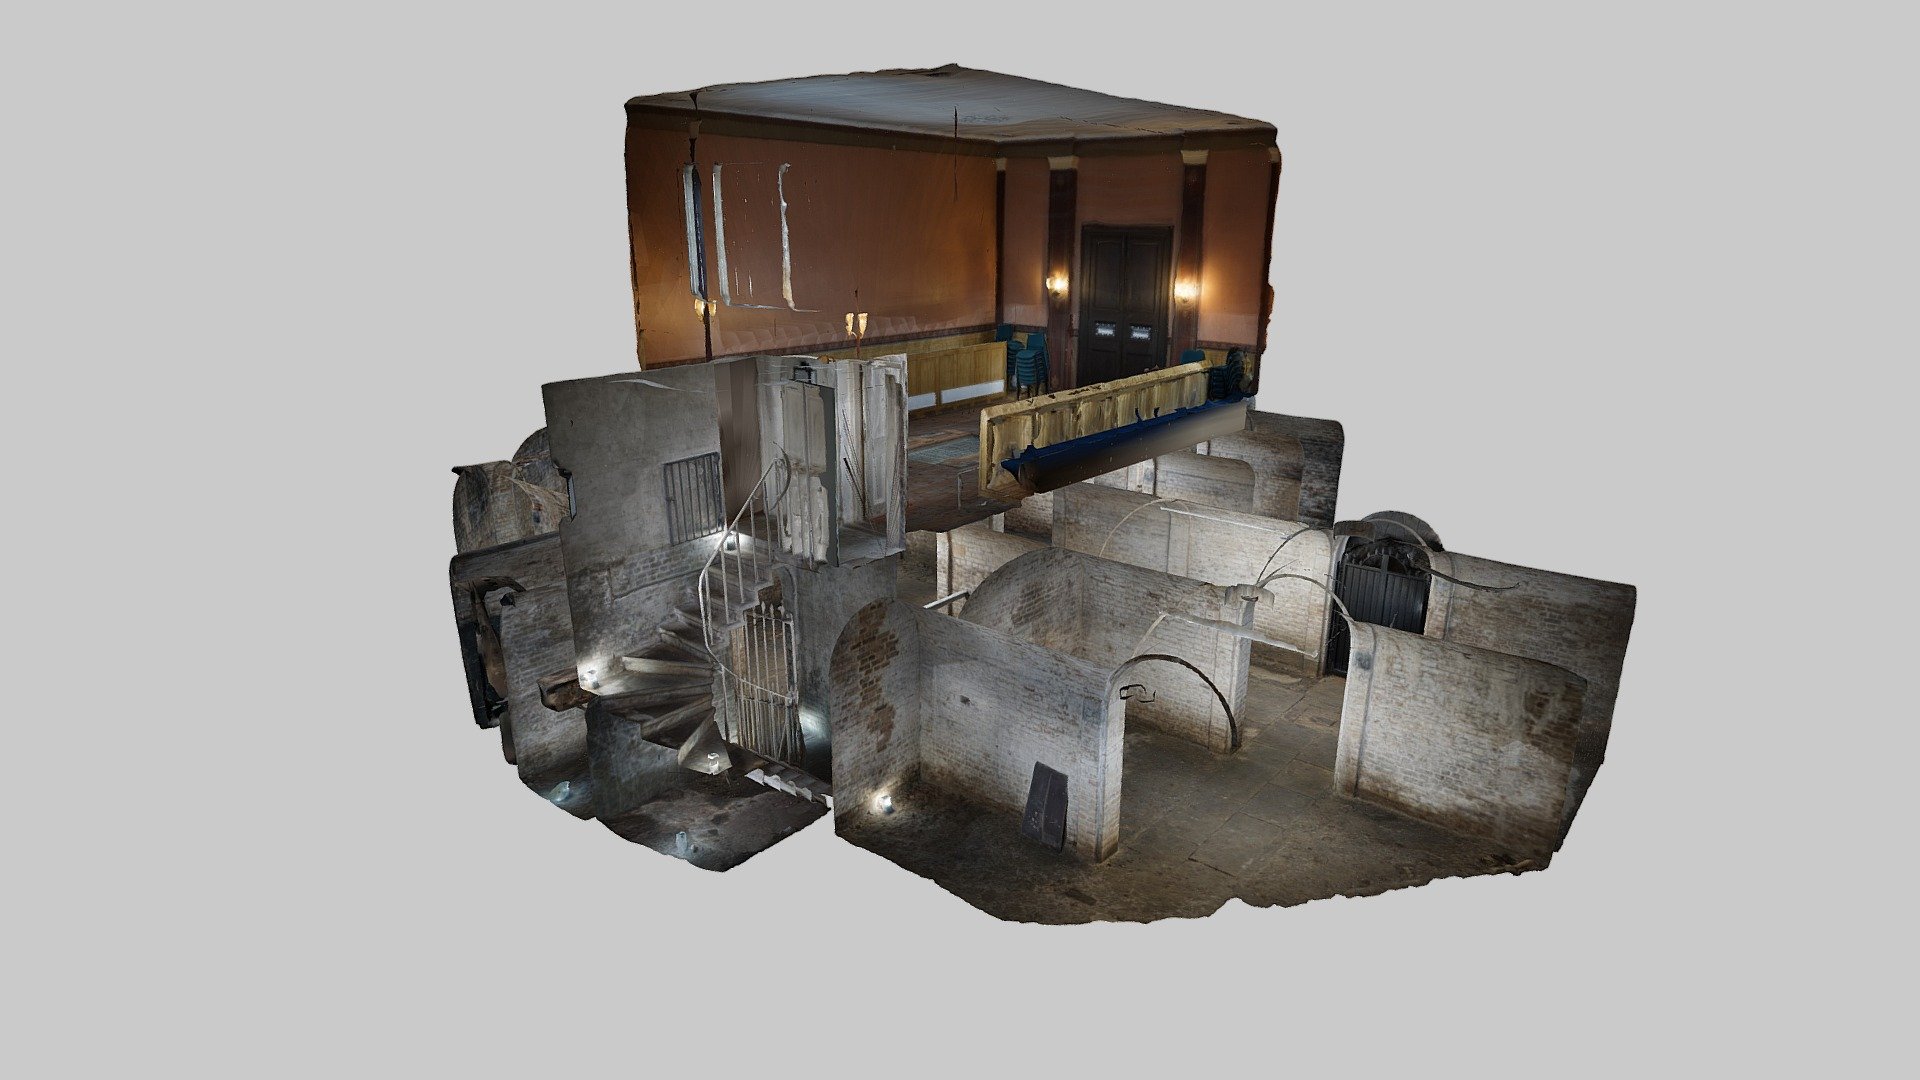 Photogrammetry capture of the crypt and Dissenters' Chapel interior at Kensal Green Cemetery, London.

Date: 1830s.

https://en.wikipedia.org/wiki/Dissenters%27_Chapel,_Kensal_Green
https://www.kensalgreen.co.uk/

Access and assistance supplied by trustee, Colin Fenn.

4848 photos taken in March 2021 with a Sony a6000 and processed in Reality Capture.
Area around loculi (coffin shelves), some railings and side gallery of chapel cleaned up by hand due to processing errors.
One corner of the crypt could not be scanned due to a locked gate to where the coffins are stored.
Scale: There is a red/orange 1 meter ruler on the ground in front of the black gate in the crypt 3d model